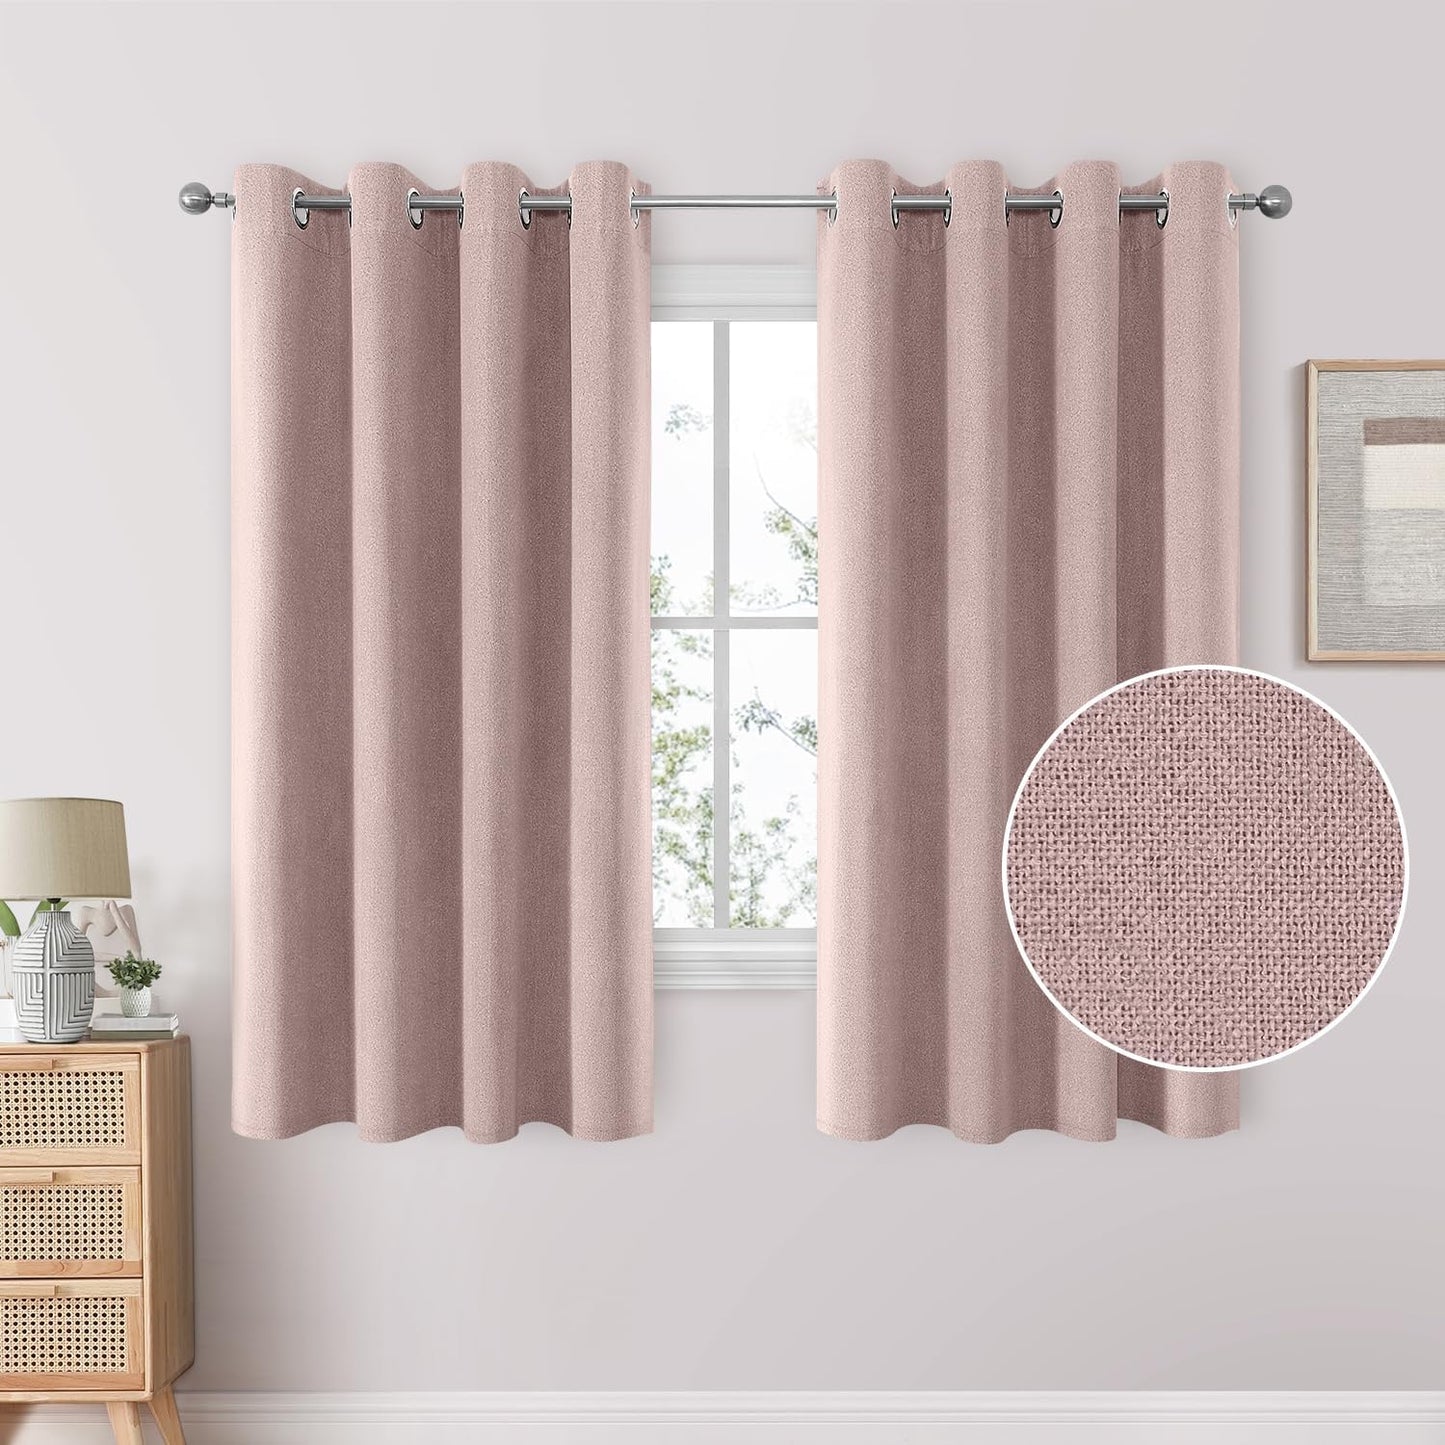 HOMEIDEAS 100% Blush Pink Linen Blackout Curtains for Bedroom, 52 X 84 Inch Room Darkening Curtains for Living, Faux Linen Thermal Insulated Full Black Out Grommet Window Curtains/Drapes  HOMEIDEAS Blush Pink W52" X L63" 